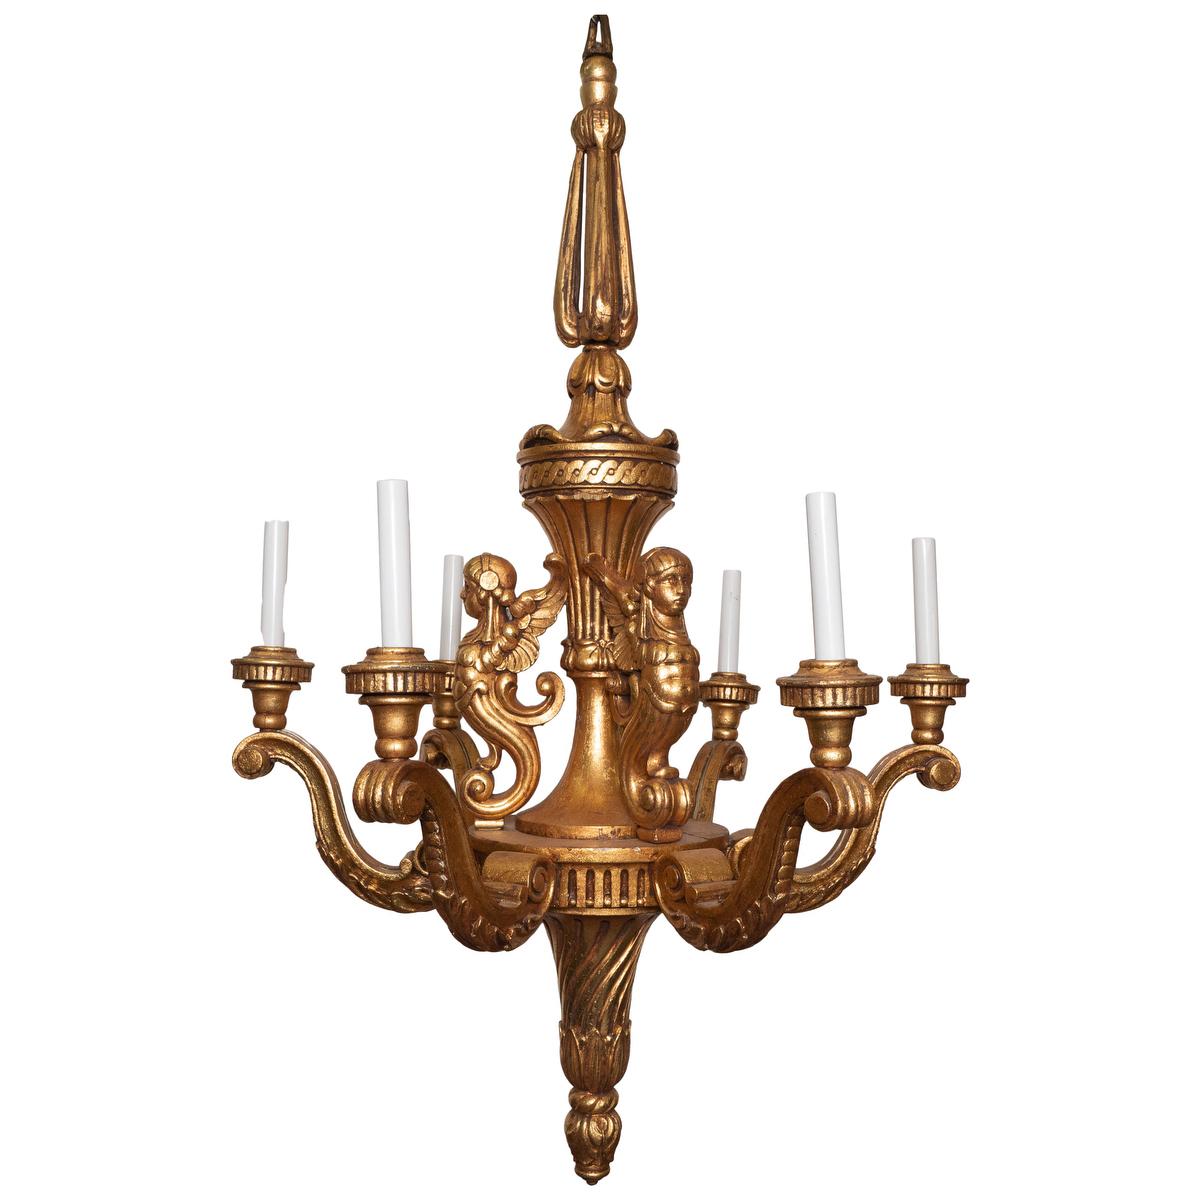 6-arm giltwood chandelier featuring ornate carved figurehead and foliate details.